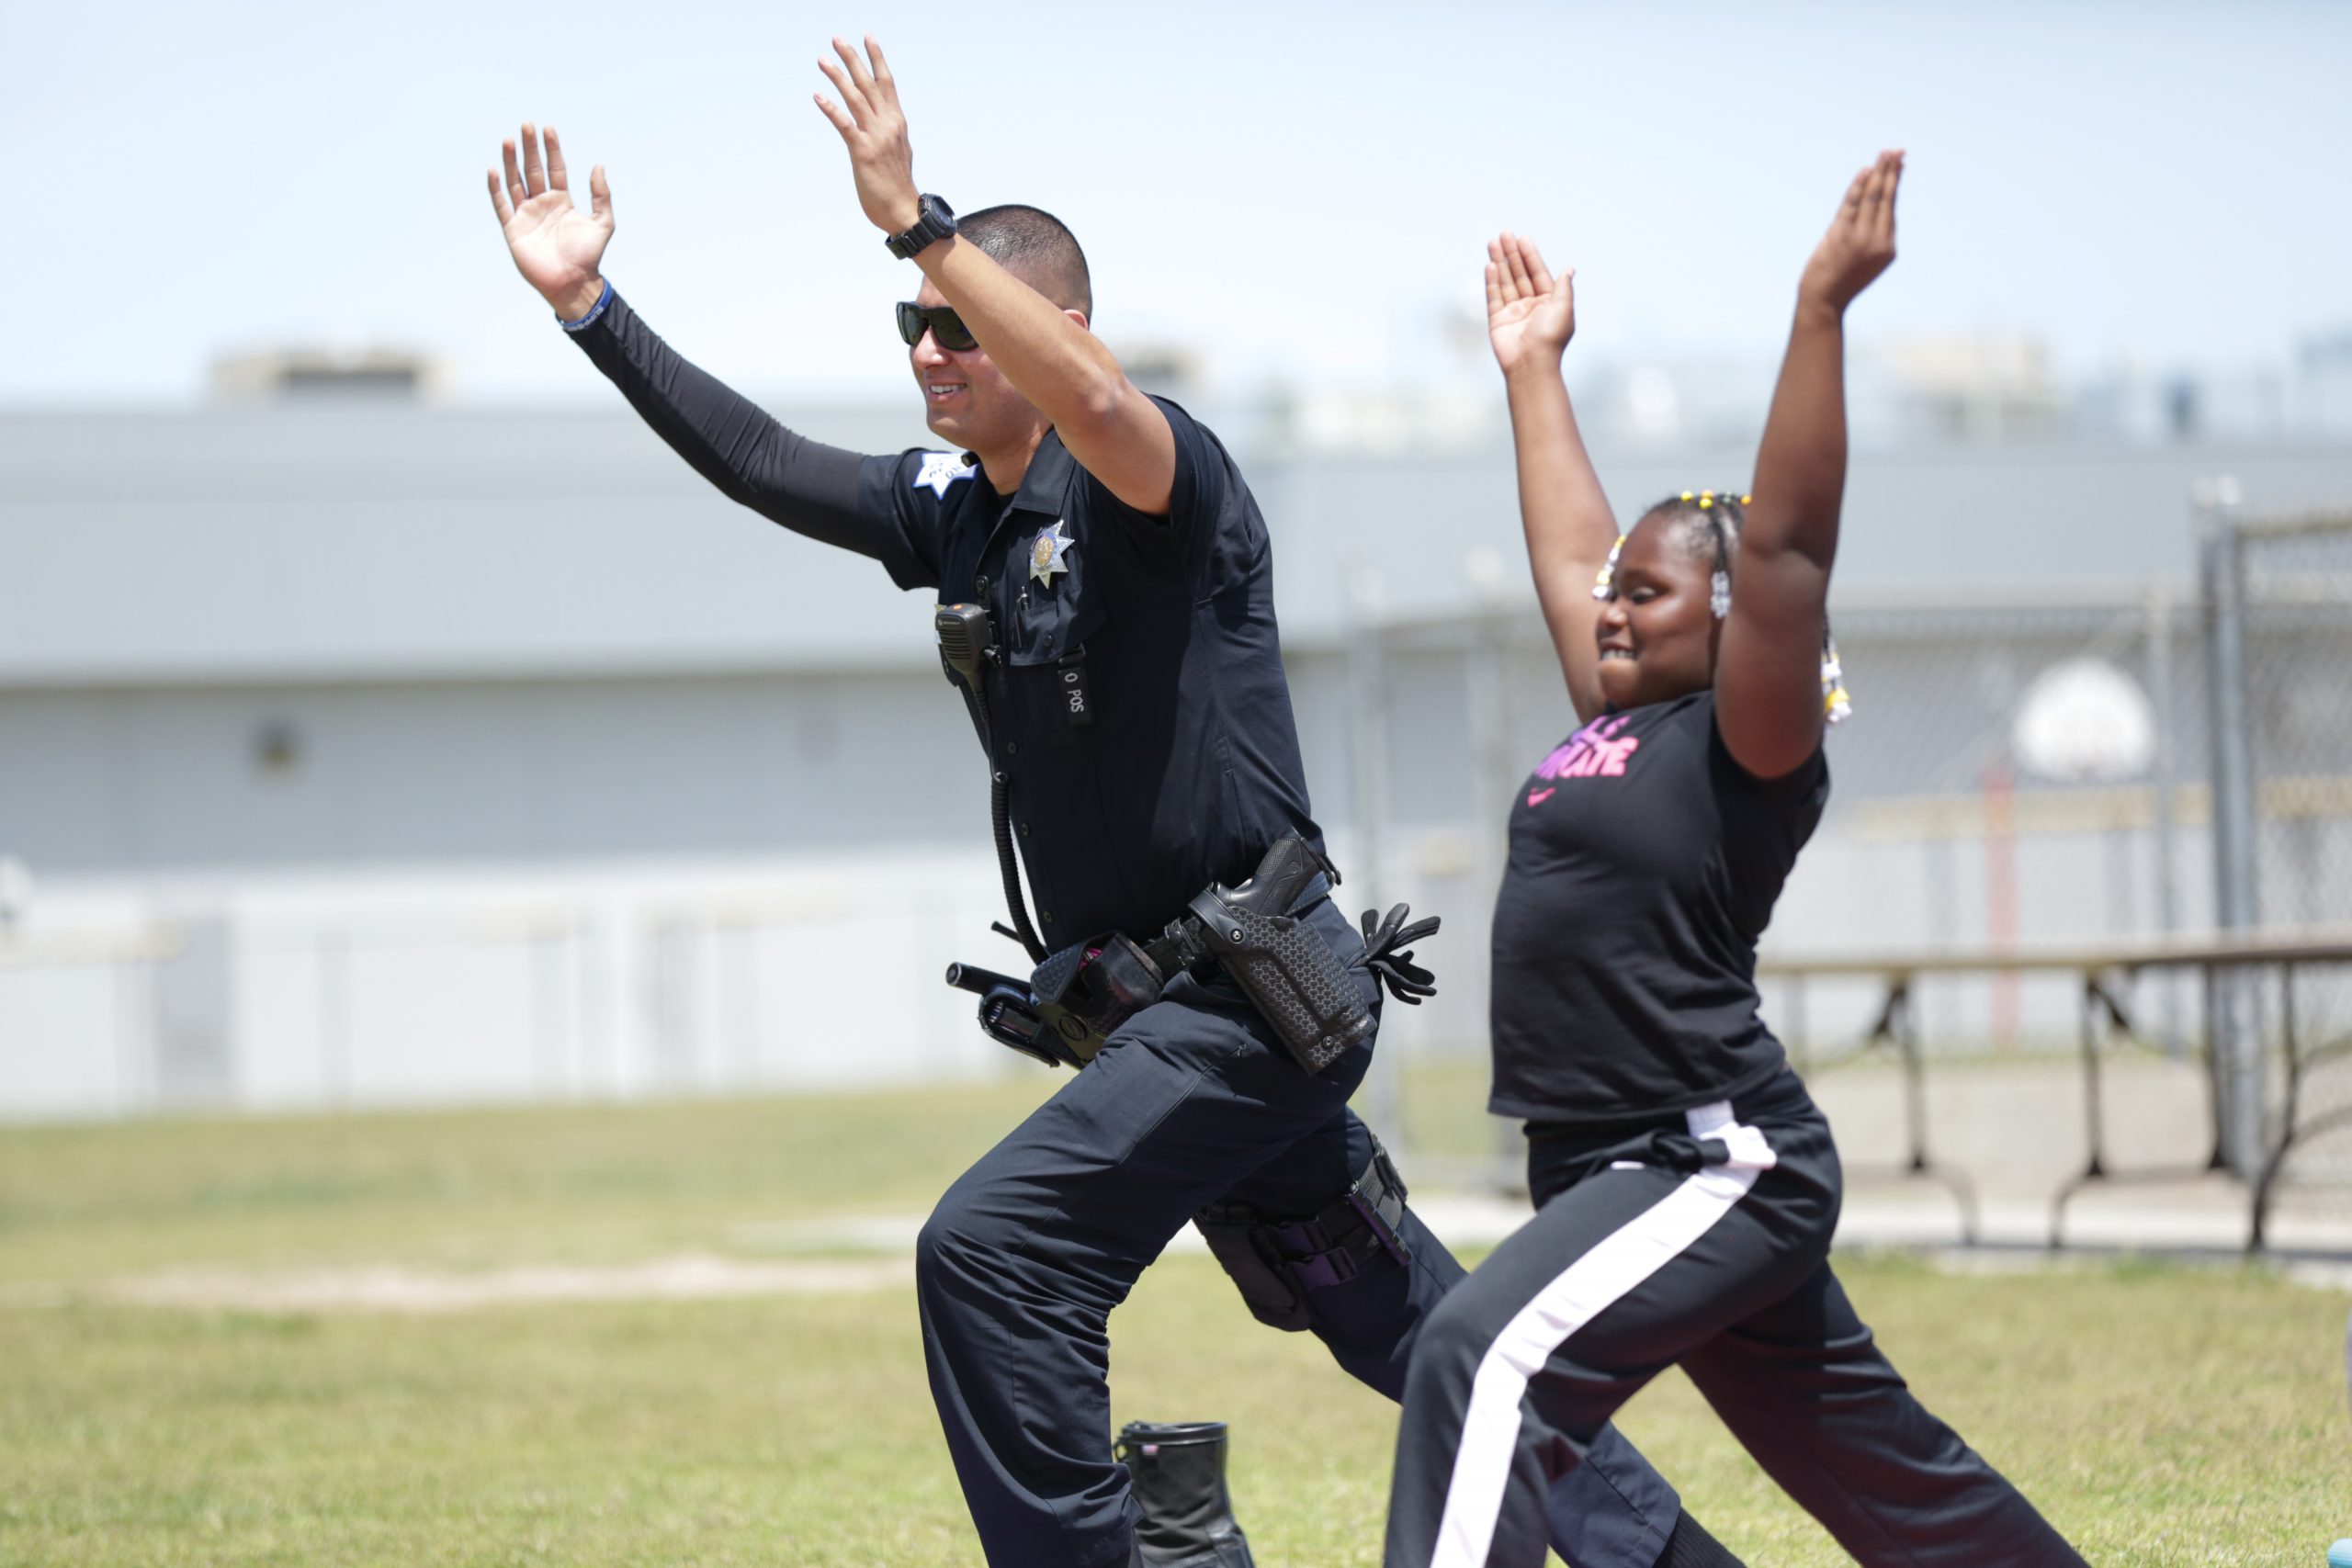 A policeman and a kid do yoga in a schoolyard